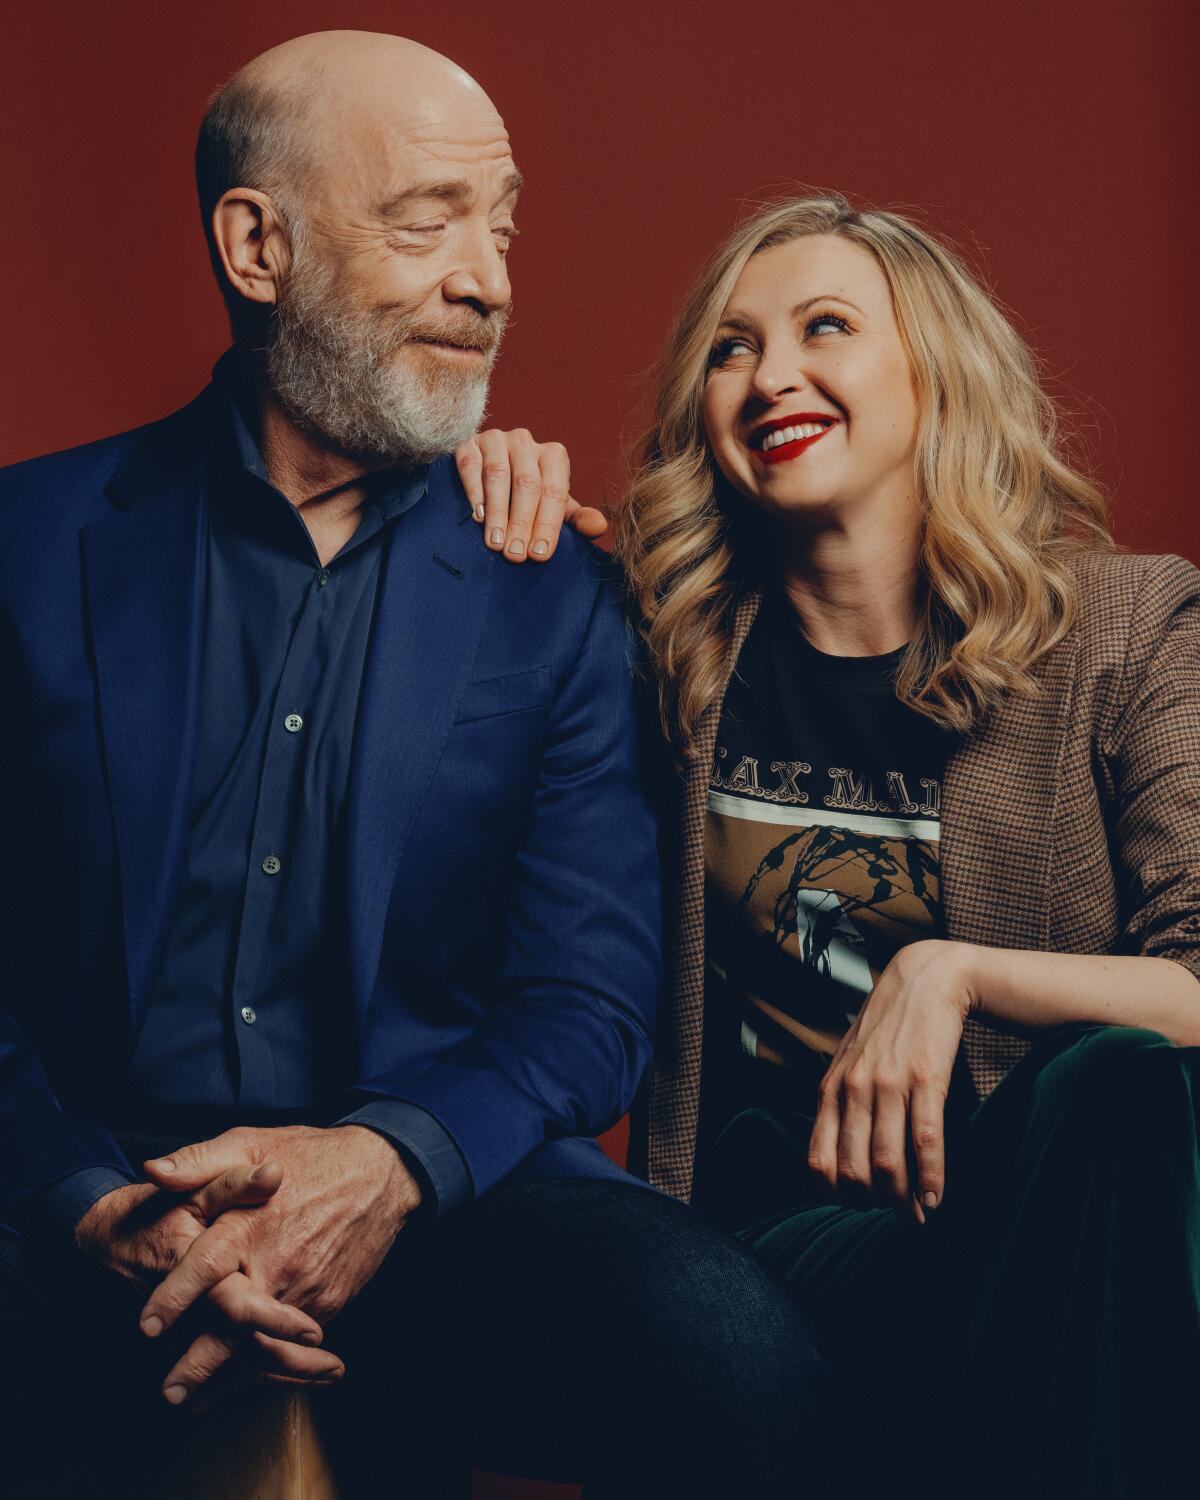 J.K. Simmons and Nina Arianda smile at each other.